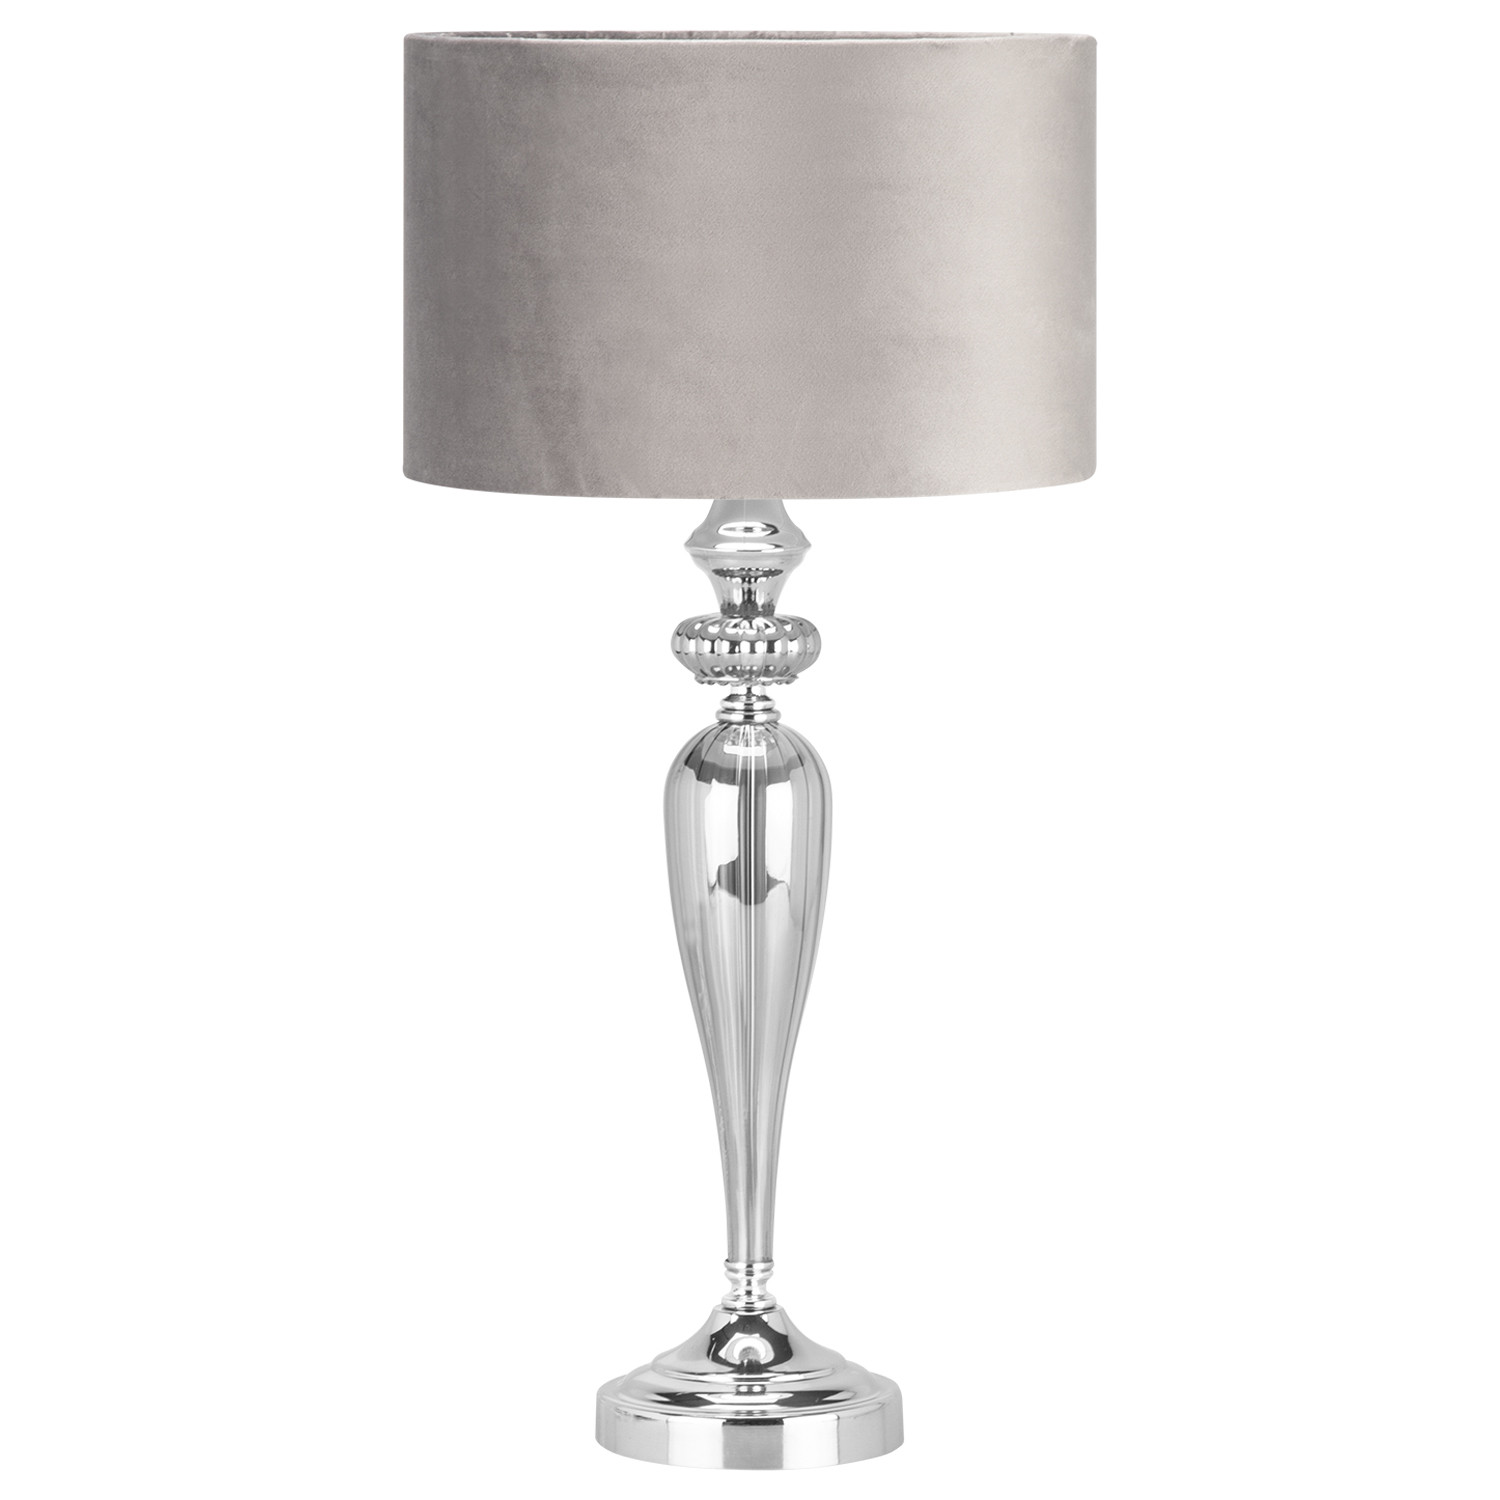 Pewter Smoked Silver Table Lamp Image 1